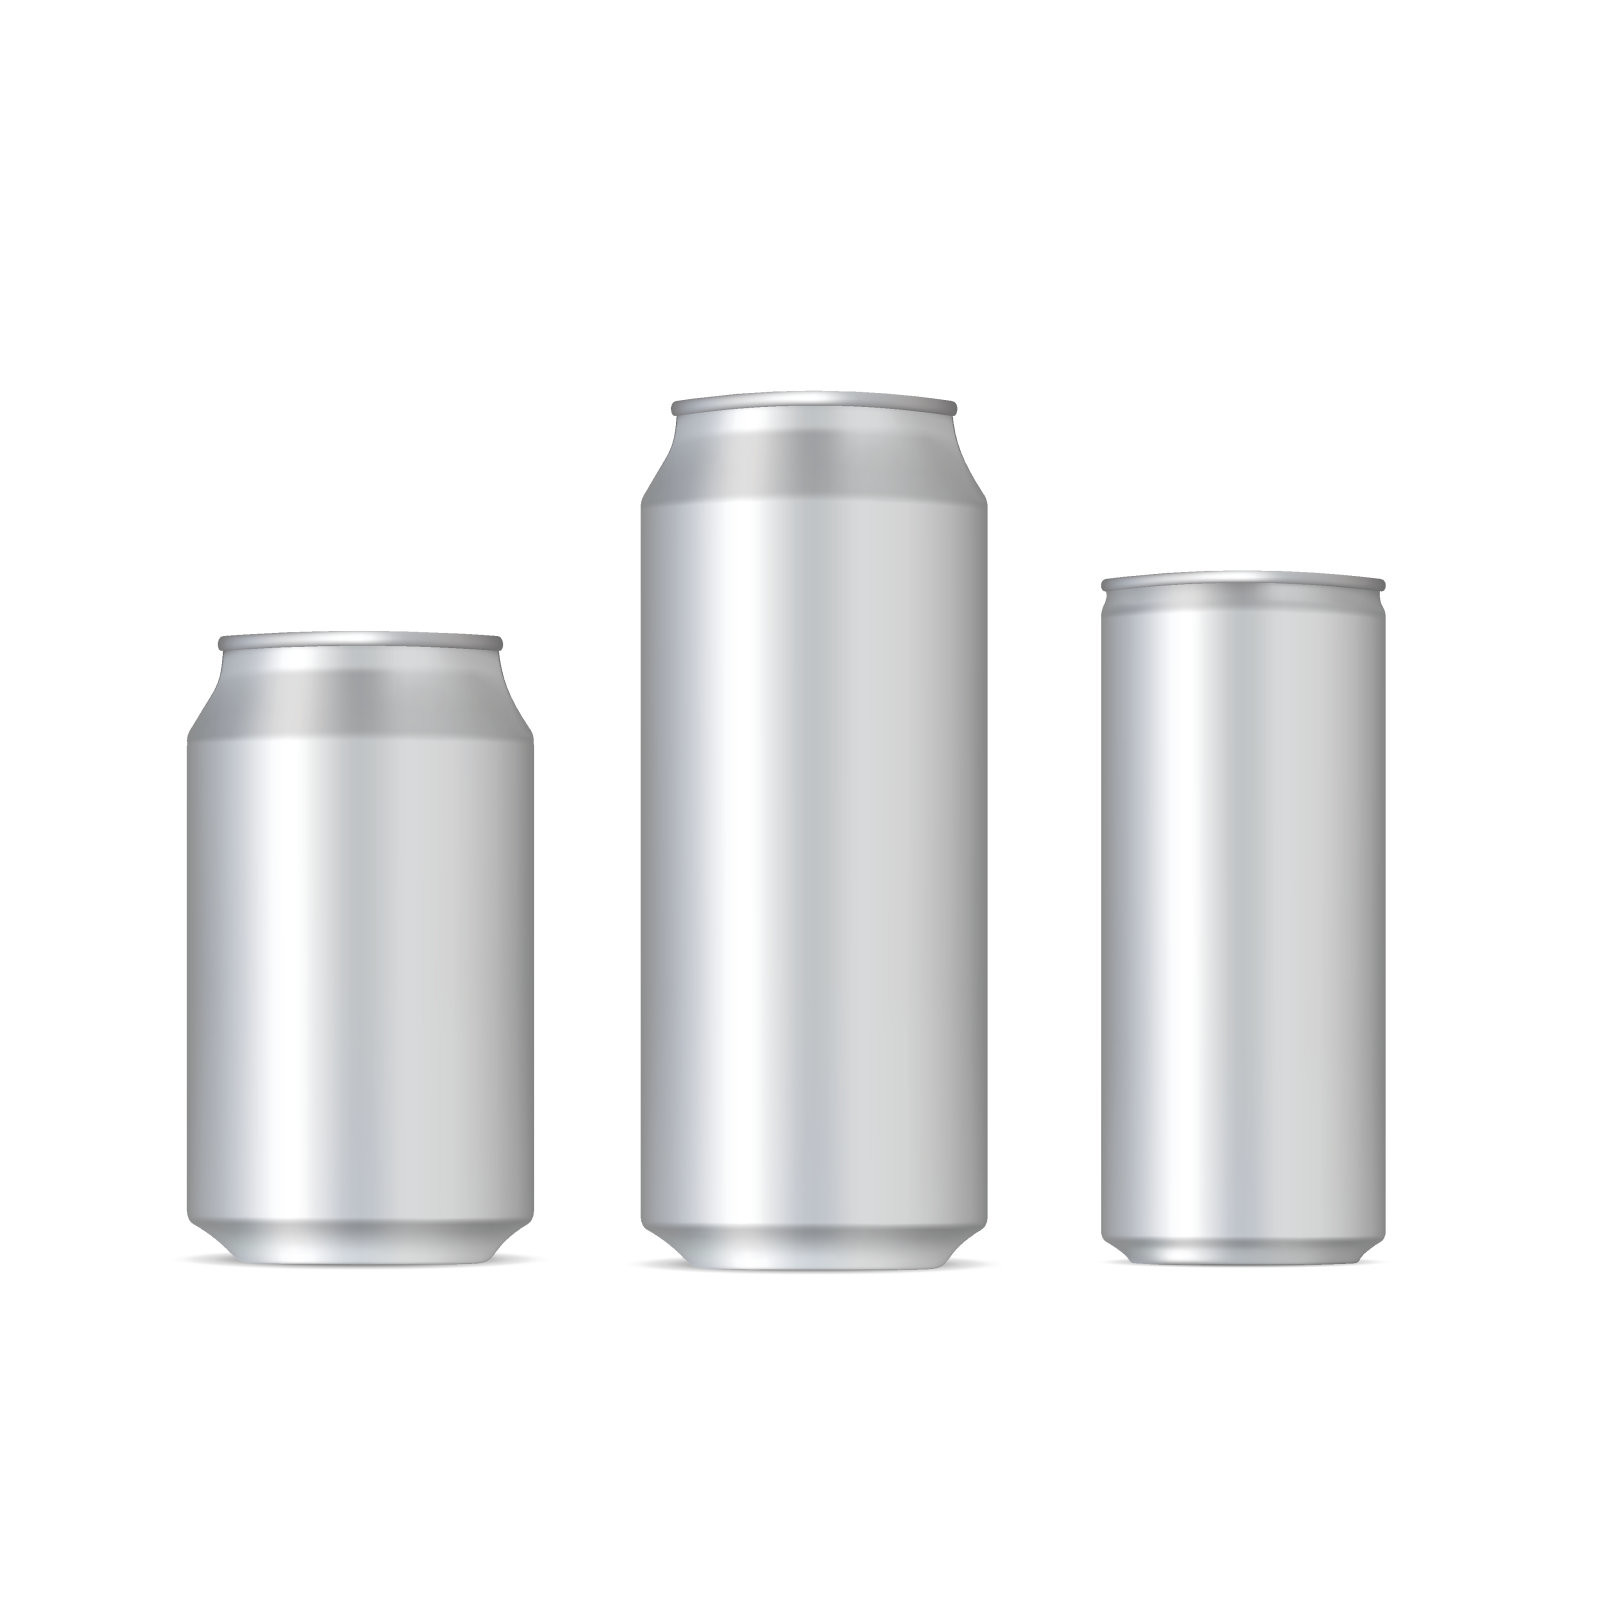 Wholesale B64 CDL Lid 355ml Sleek 2 Piece 12oz Aluminium Cans from china suppliers